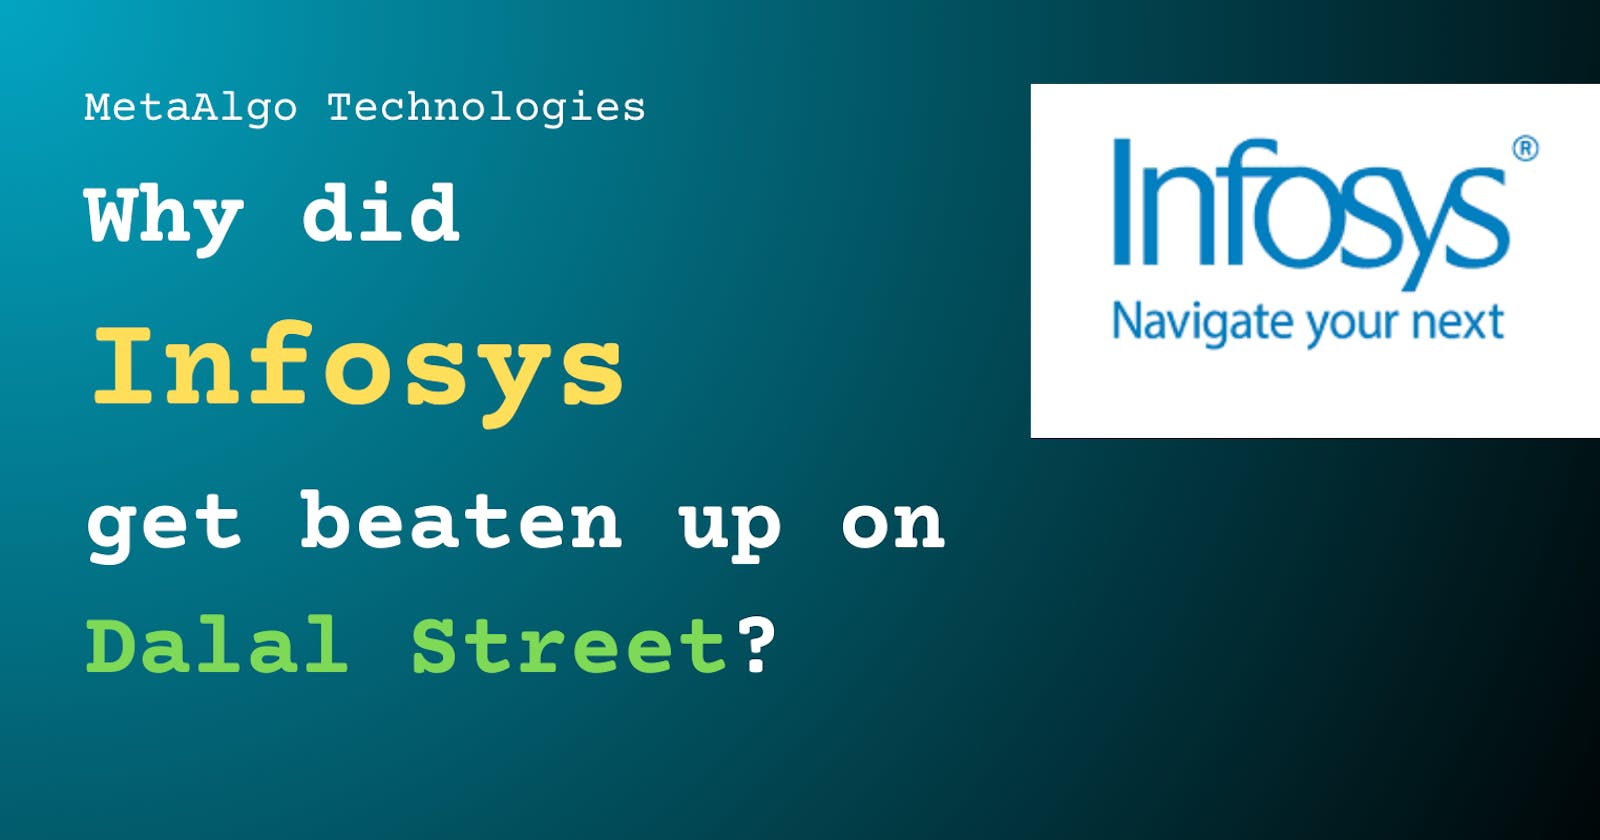 Why did Infosys get beaten up on Dalal Street?